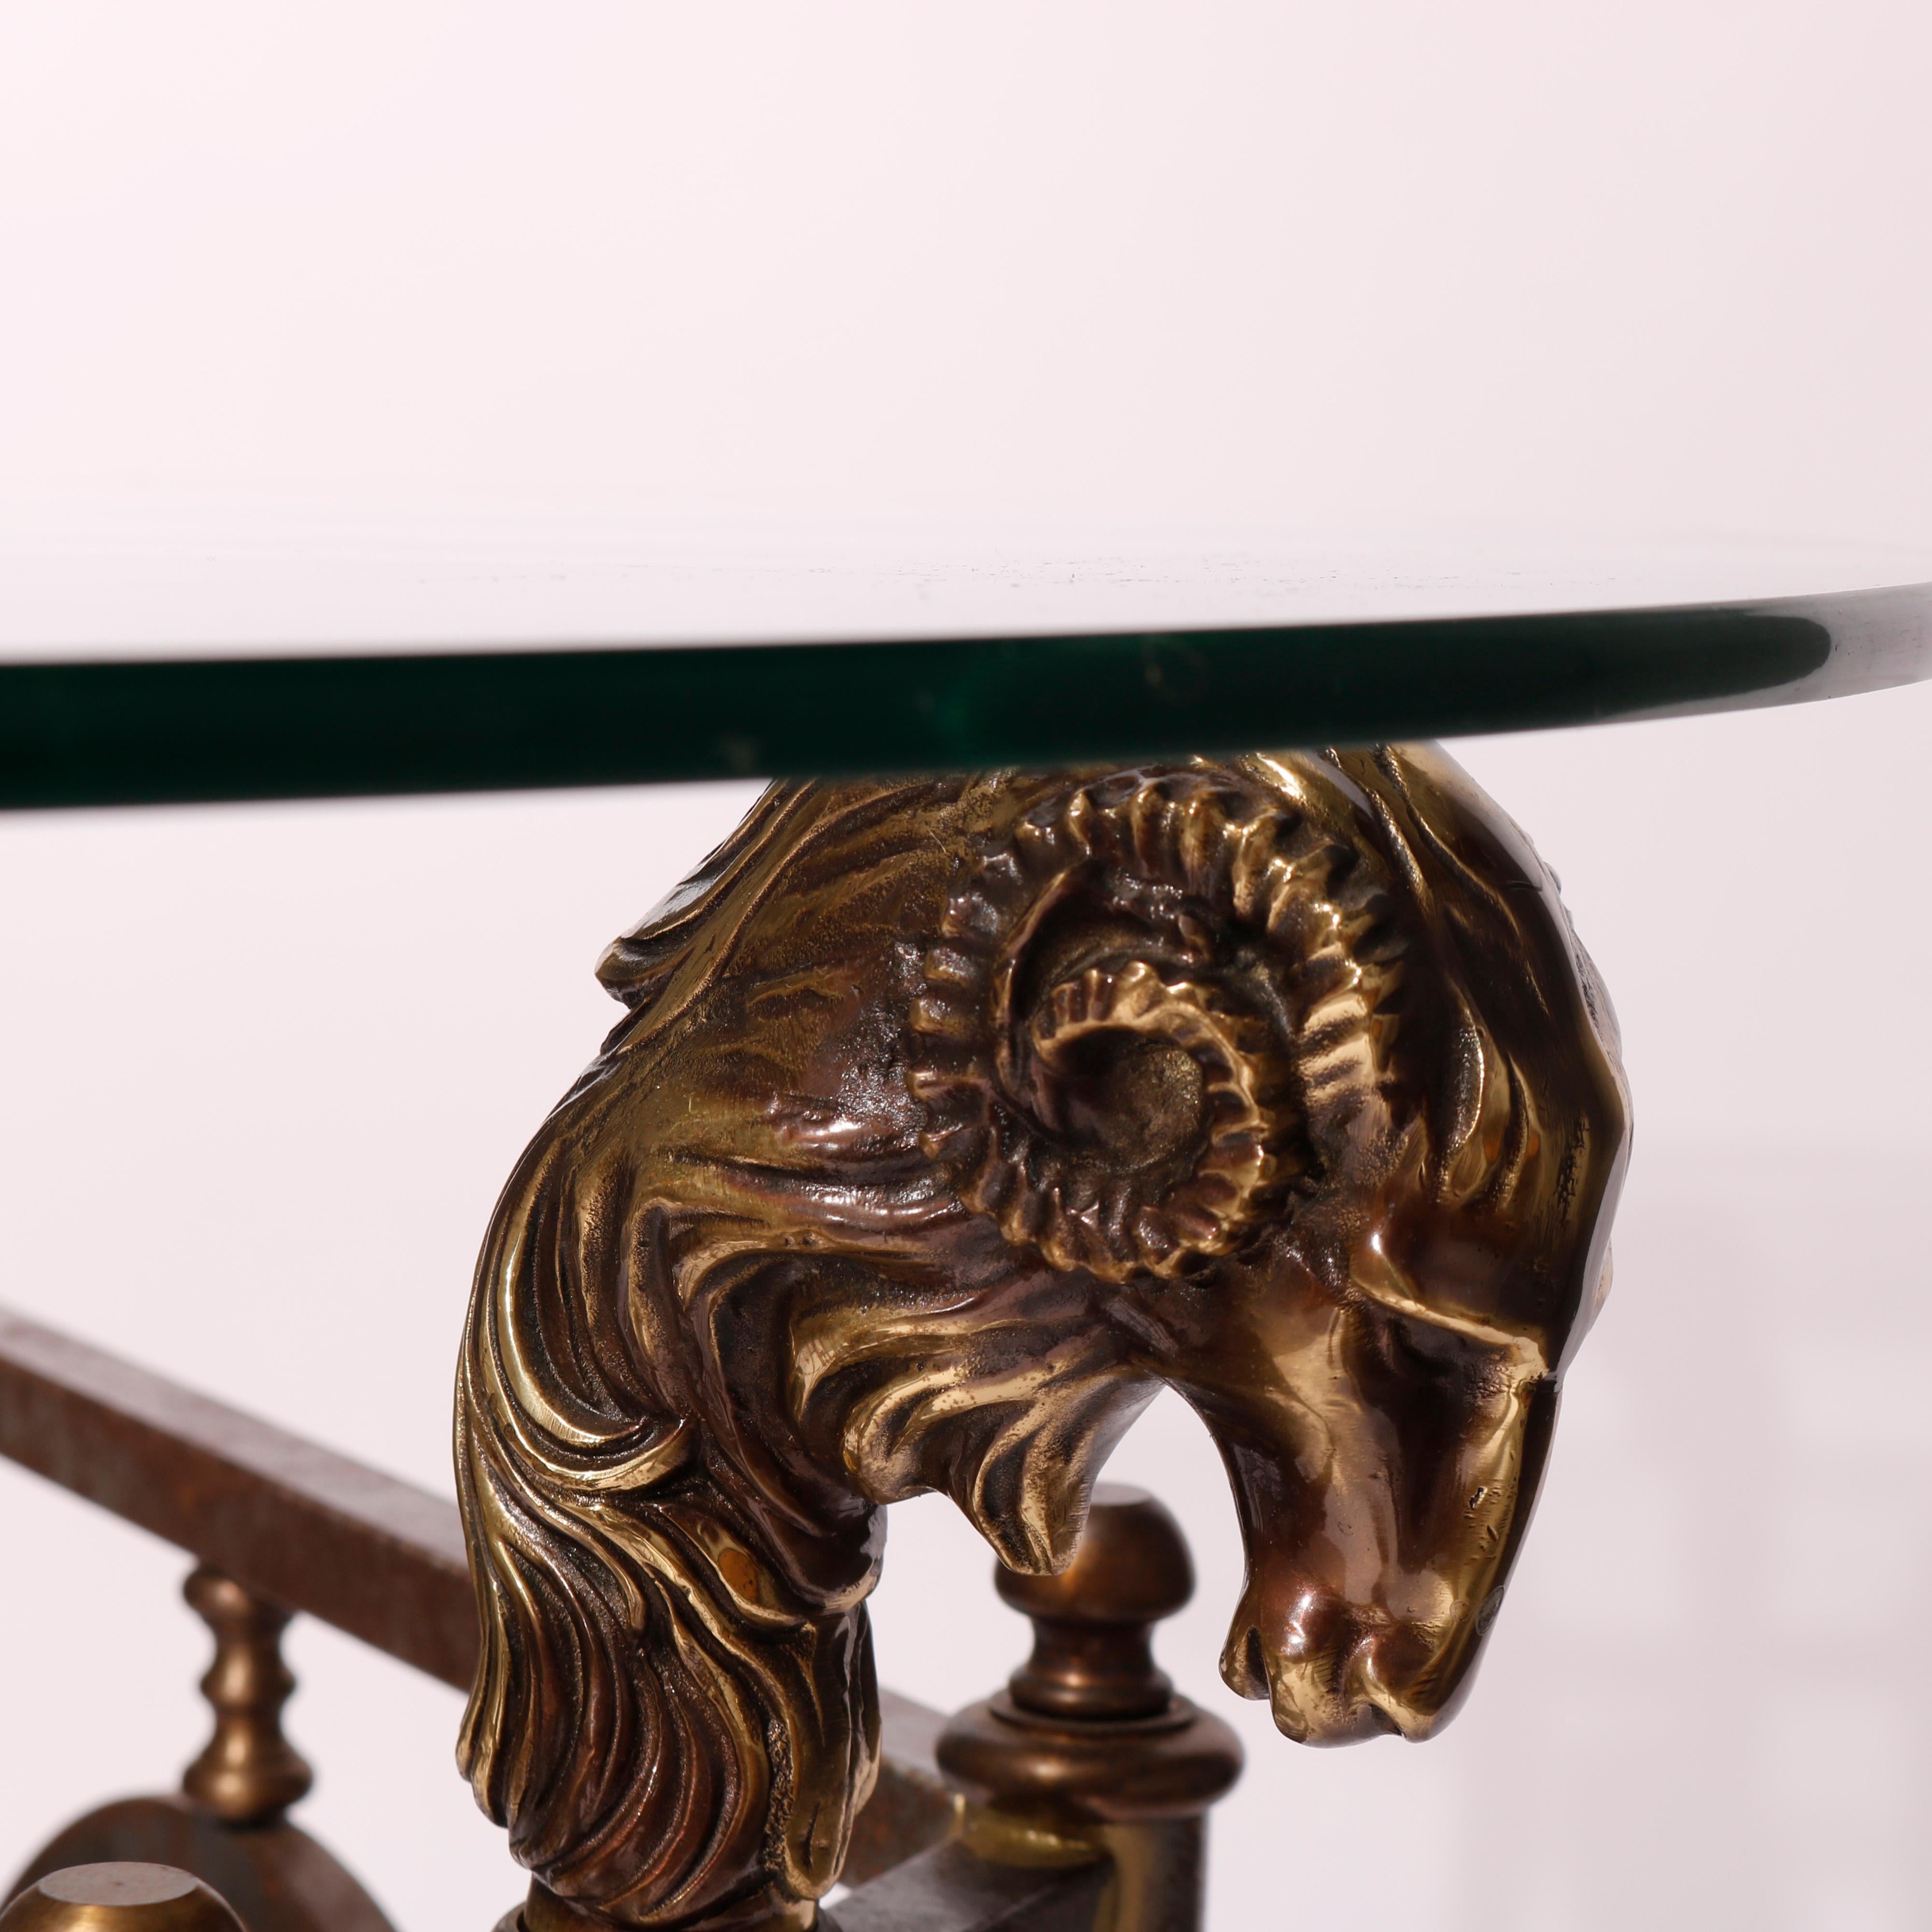 French Empire Figural Bronzed Metal & Glass Center Table with Ram's Heads 20th C In Good Condition For Sale In Big Flats, NY